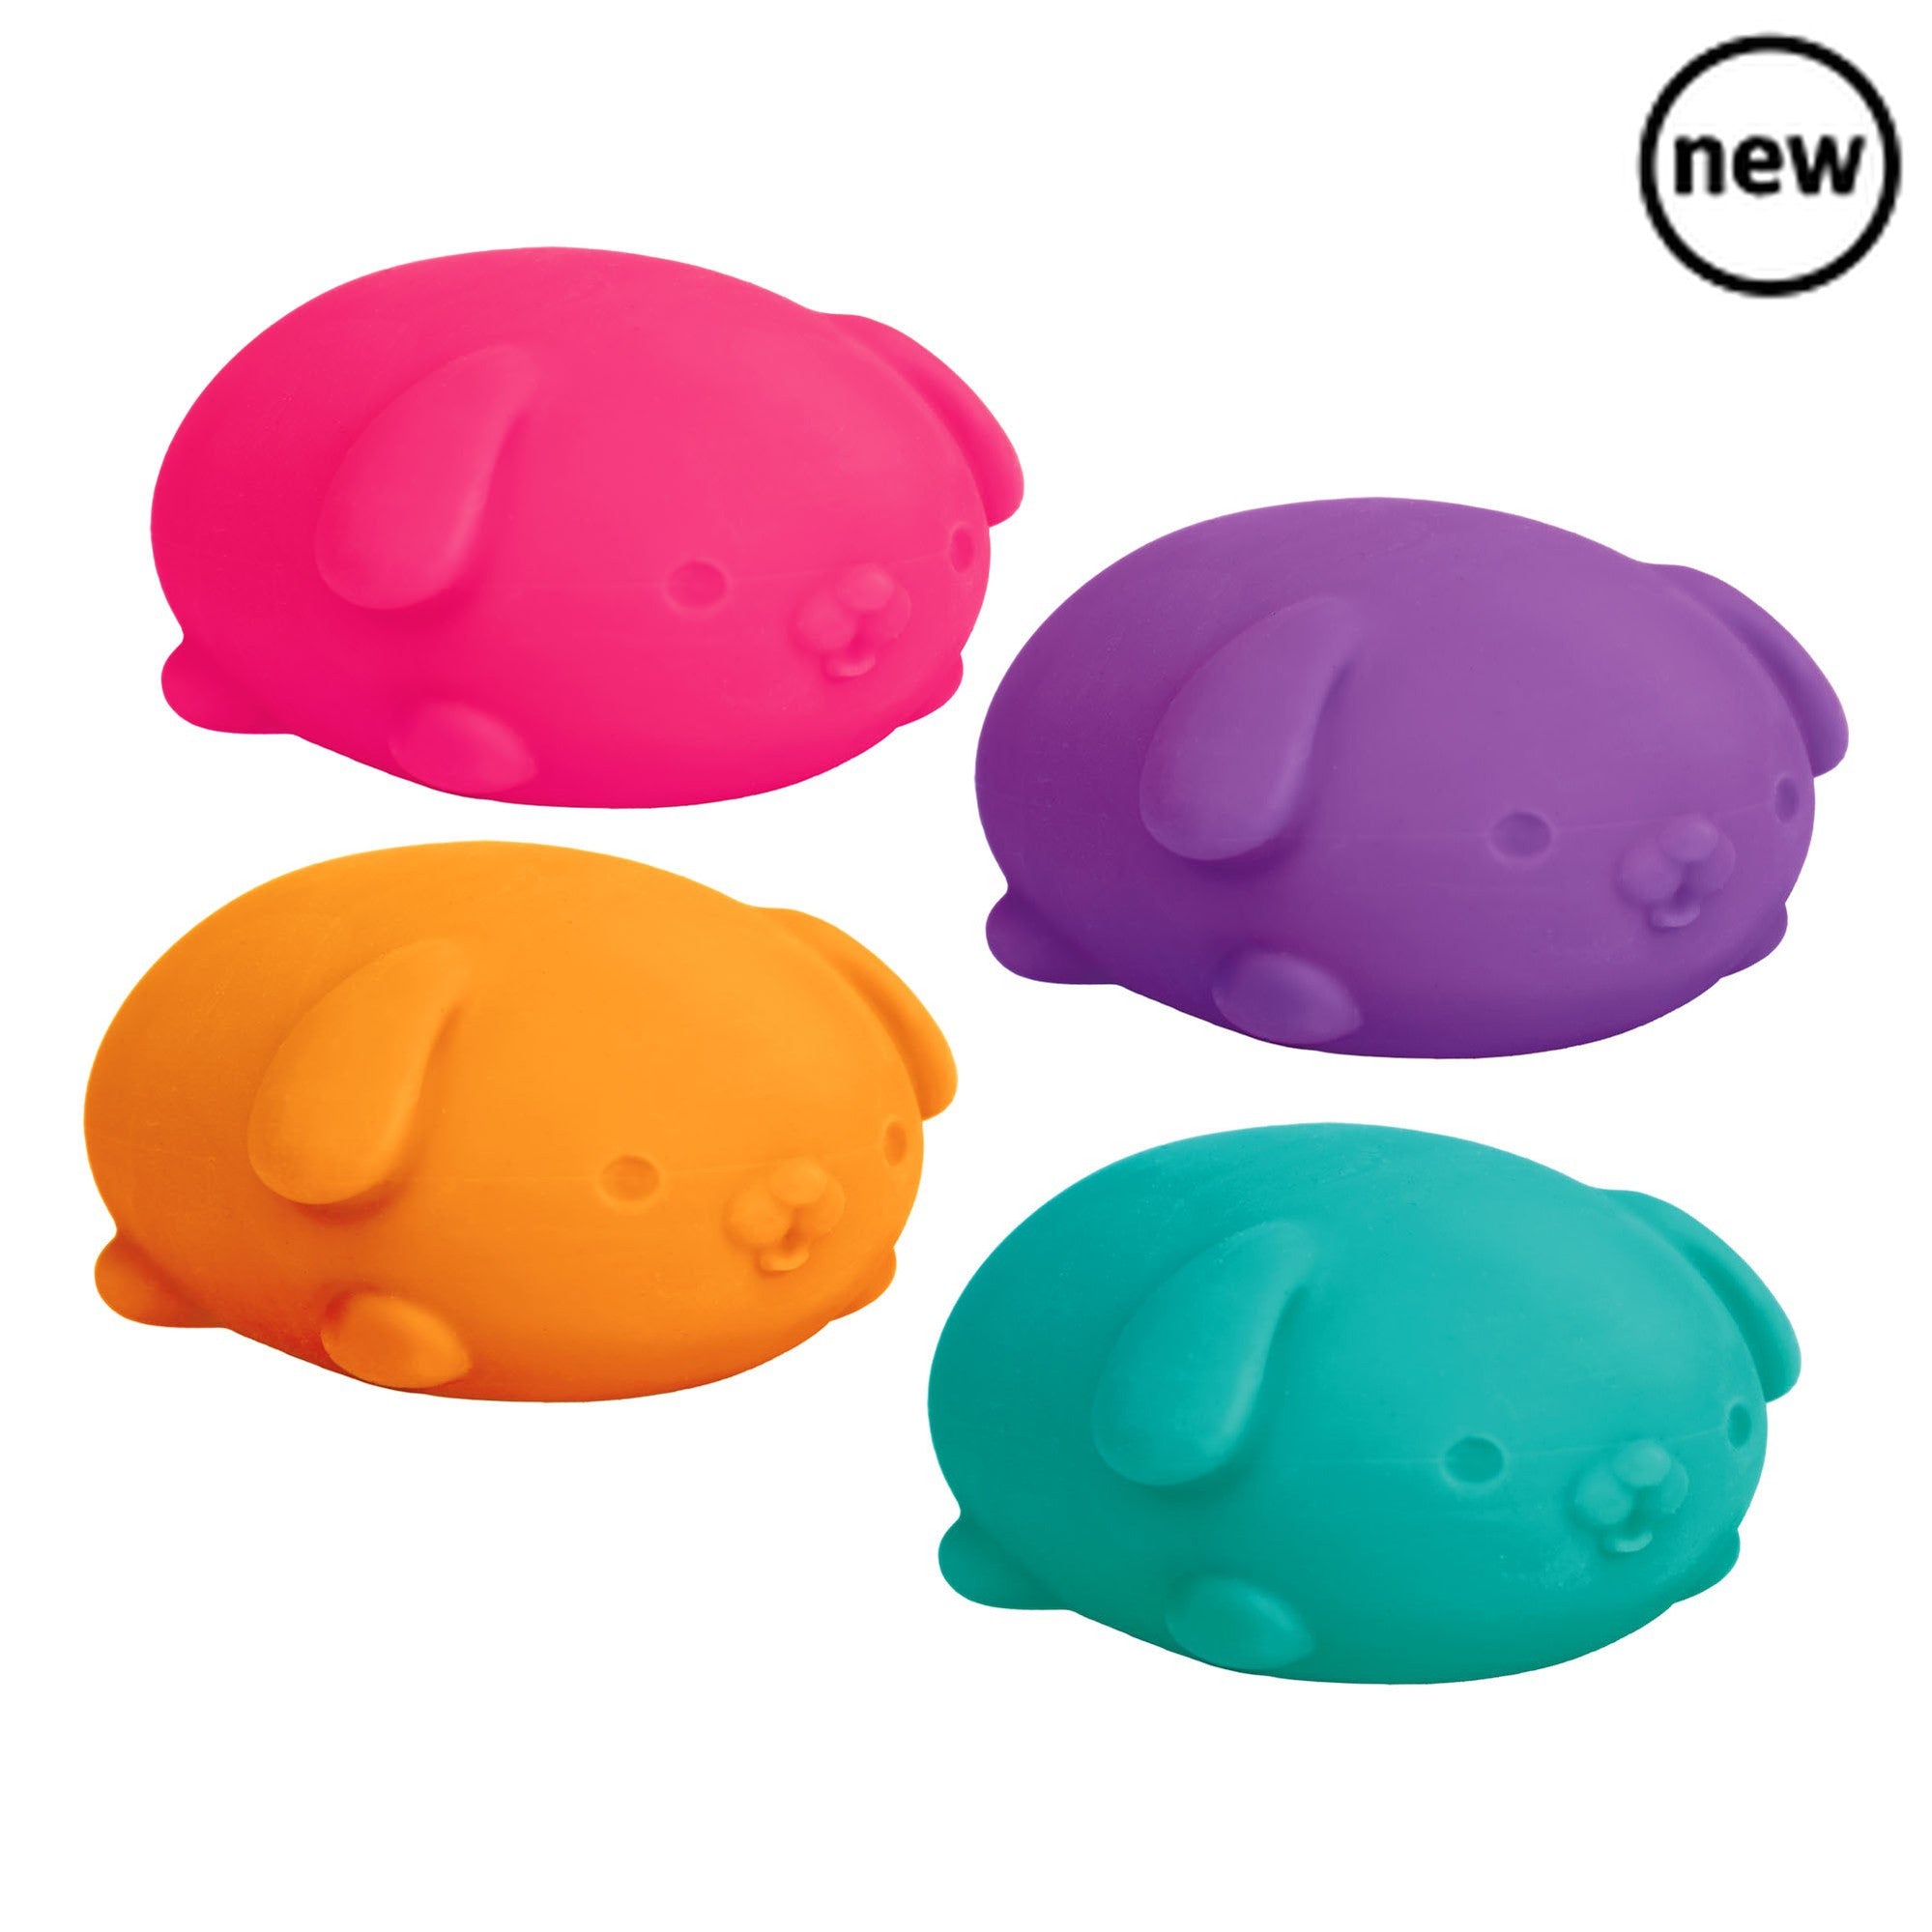 NeeDoh Funky Pup, For a ‘paw-some’ fidget toy, look no further than NeeDoh Funky Pups. Squeeze away any stress with these adorable squashy puppies. Squeeze it, squish it, or pet it. These unique Nee Doh stress balls have a tummy filled with the famous non-toxic doh and are available in four different colours (chosen at random). Features floppy ears, eyes and a cute nose. NeeDoh Funky Pups are a great fidget toy, particularly appropriate for those with ADD, ADHD, OCD, Autism, and anxiety. Gentle on little fi